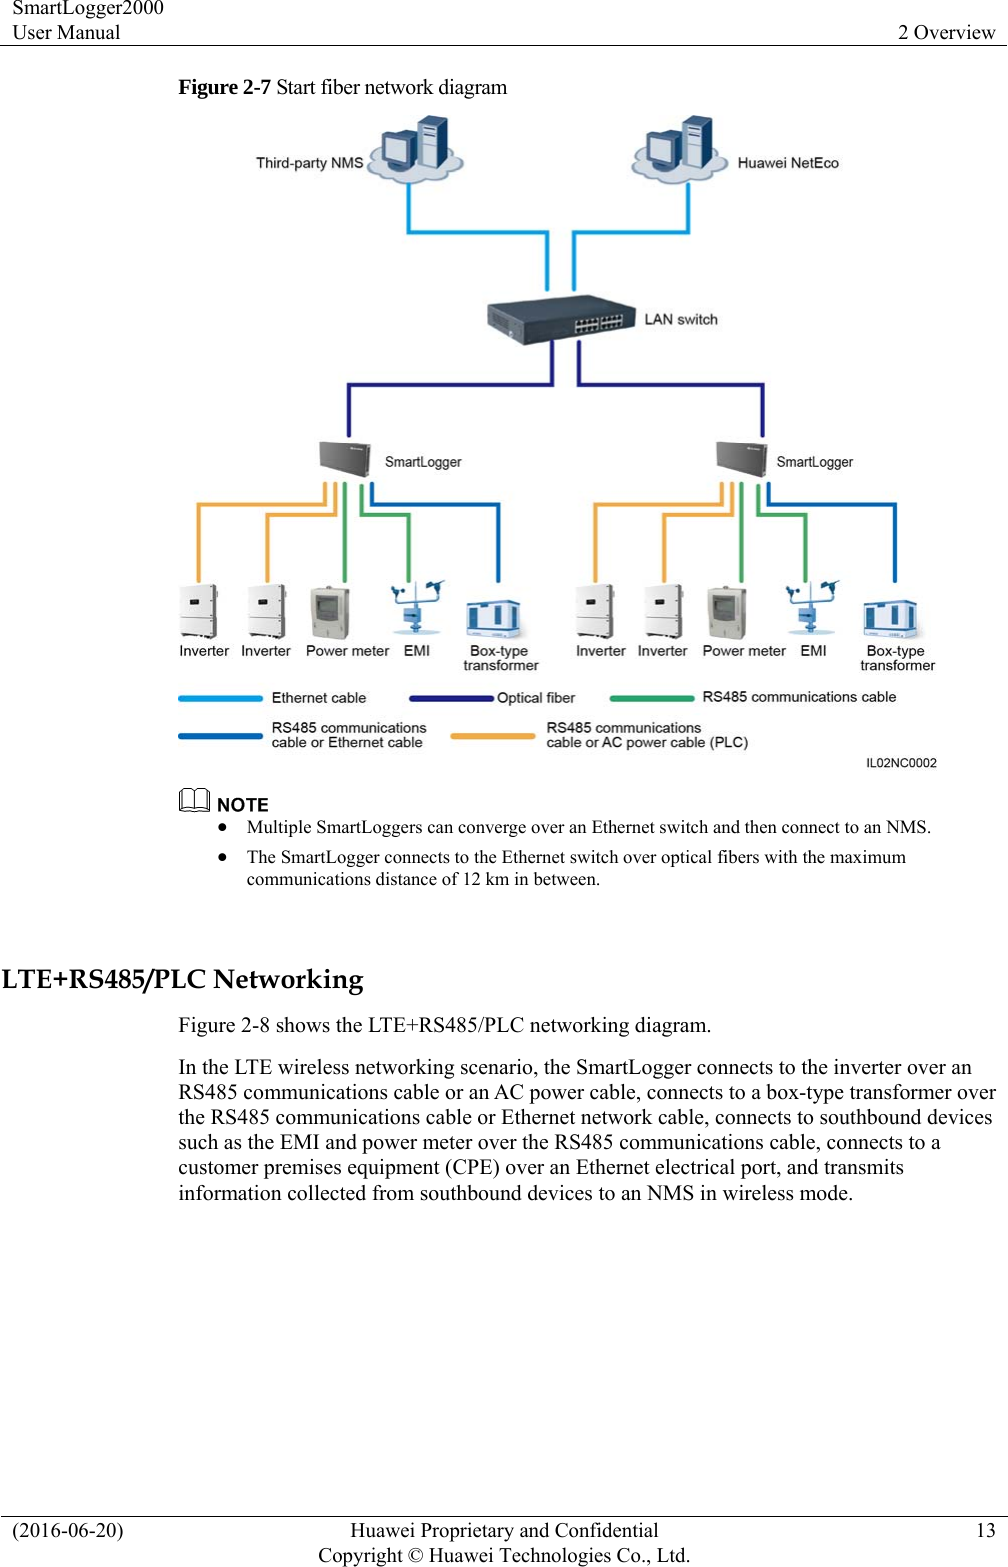 SmartLogger2000 User Manual  2 Overview (2016-06-20)  Huawei Proprietary and Confidential         Copyright © Huawei Technologies Co., Ltd.13 Figure 2-7 Start fiber network diagram    Multiple SmartLoggers can converge over an Ethernet switch and then connect to an NMS.  The SmartLogger connects to the Ethernet switch over optical fibers with the maximum communications distance of 12 km in between.  LTE+RS485/PLC Networking Figure 2-8 shows the LTE+RS485/PLC networking diagram. In the LTE wireless networking scenario, the SmartLogger connects to the inverter over an RS485 communications cable or an AC power cable, connects to a box-type transformer over the RS485 communications cable or Ethernet network cable, connects to southbound devices such as the EMI and power meter over the RS485 communications cable, connects to a customer premises equipment (CPE) over an Ethernet electrical port, and transmits information collected from southbound devices to an NMS in wireless mode. 